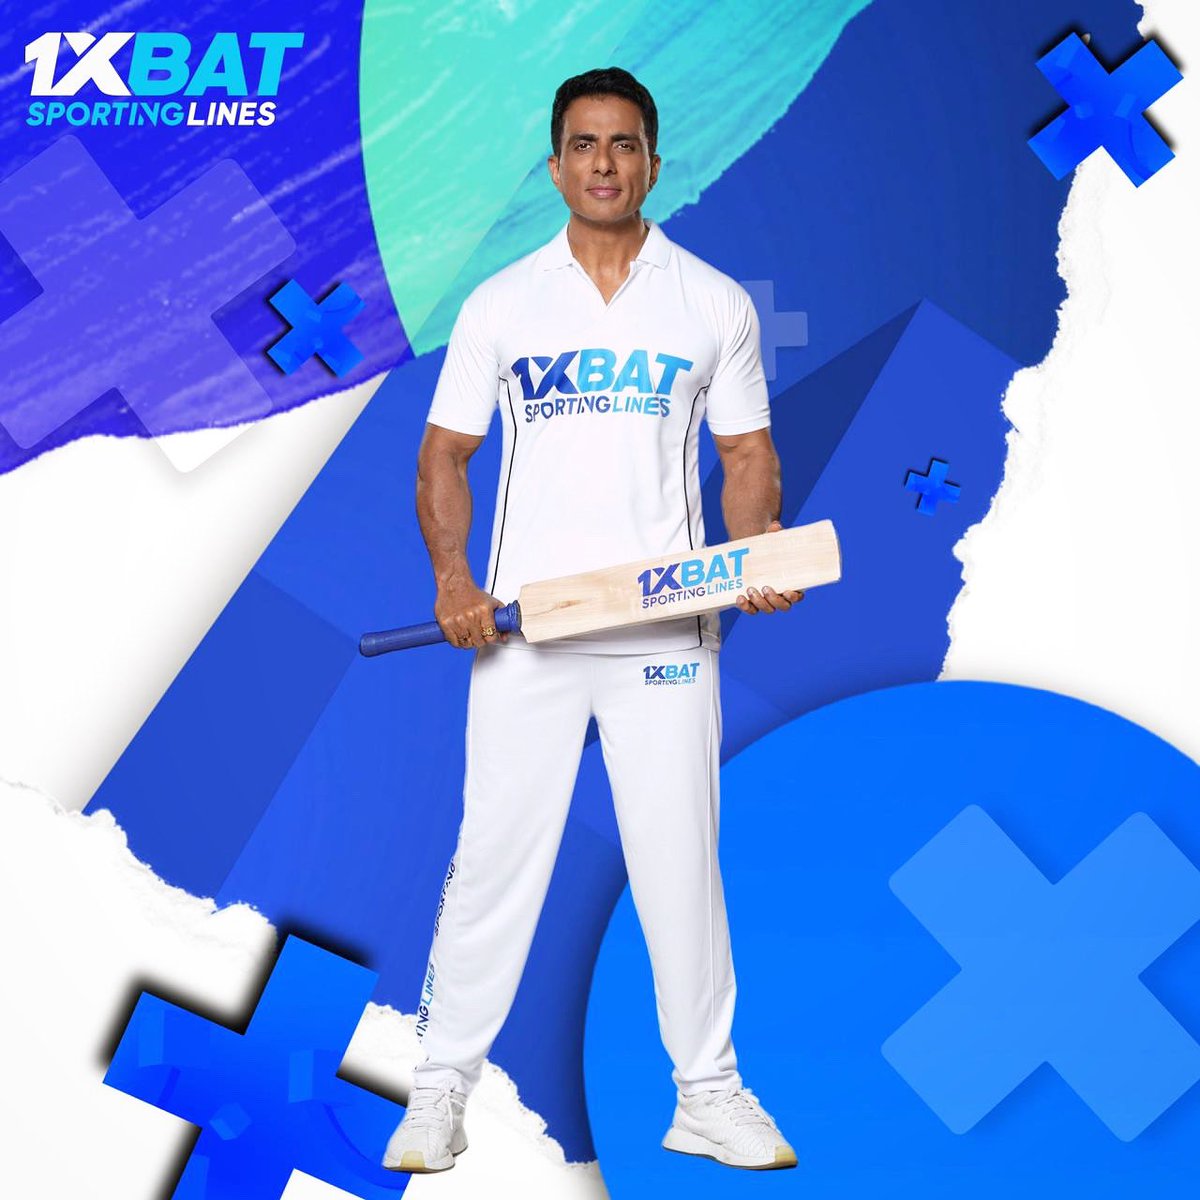 Join *1xBat Sporting Lines* for the most up-to-date sports info! Cricket, football, kabaddi, and much more! All in one platform! Search for *1xBat* on the Internet. United by WIN! @1xBatSporting #1xbatsportinglines